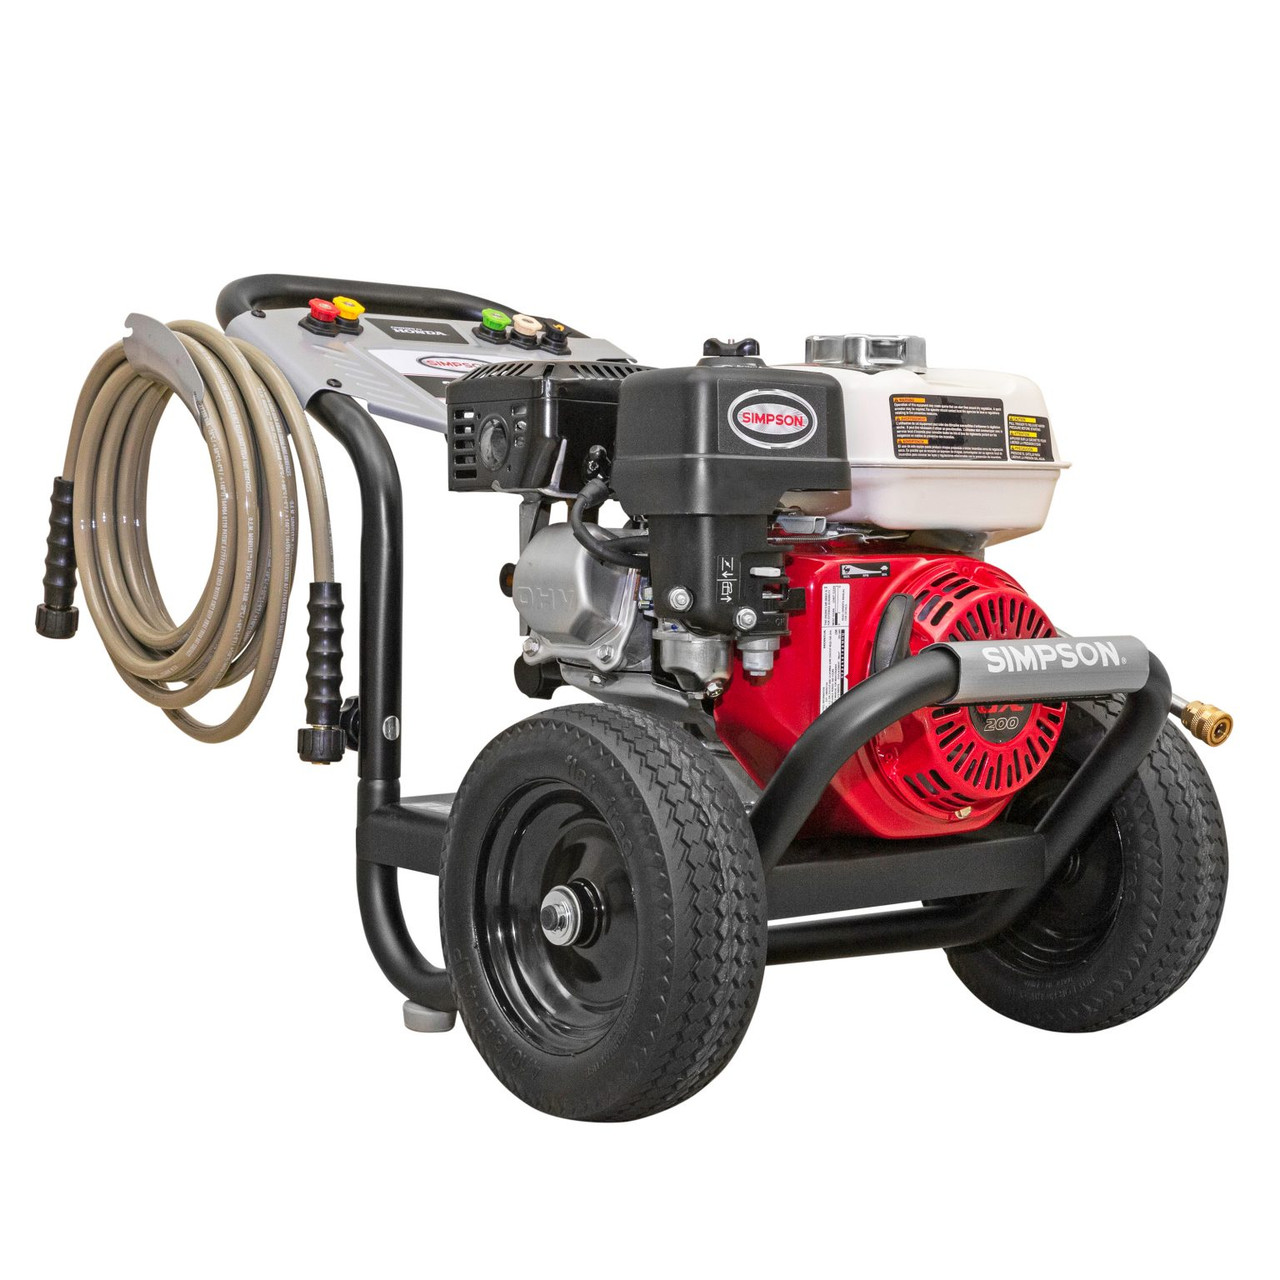 SIMPSON PowerShot PS61002-S Gas Pressure Washer 3500 PSI at 2.5 GPM